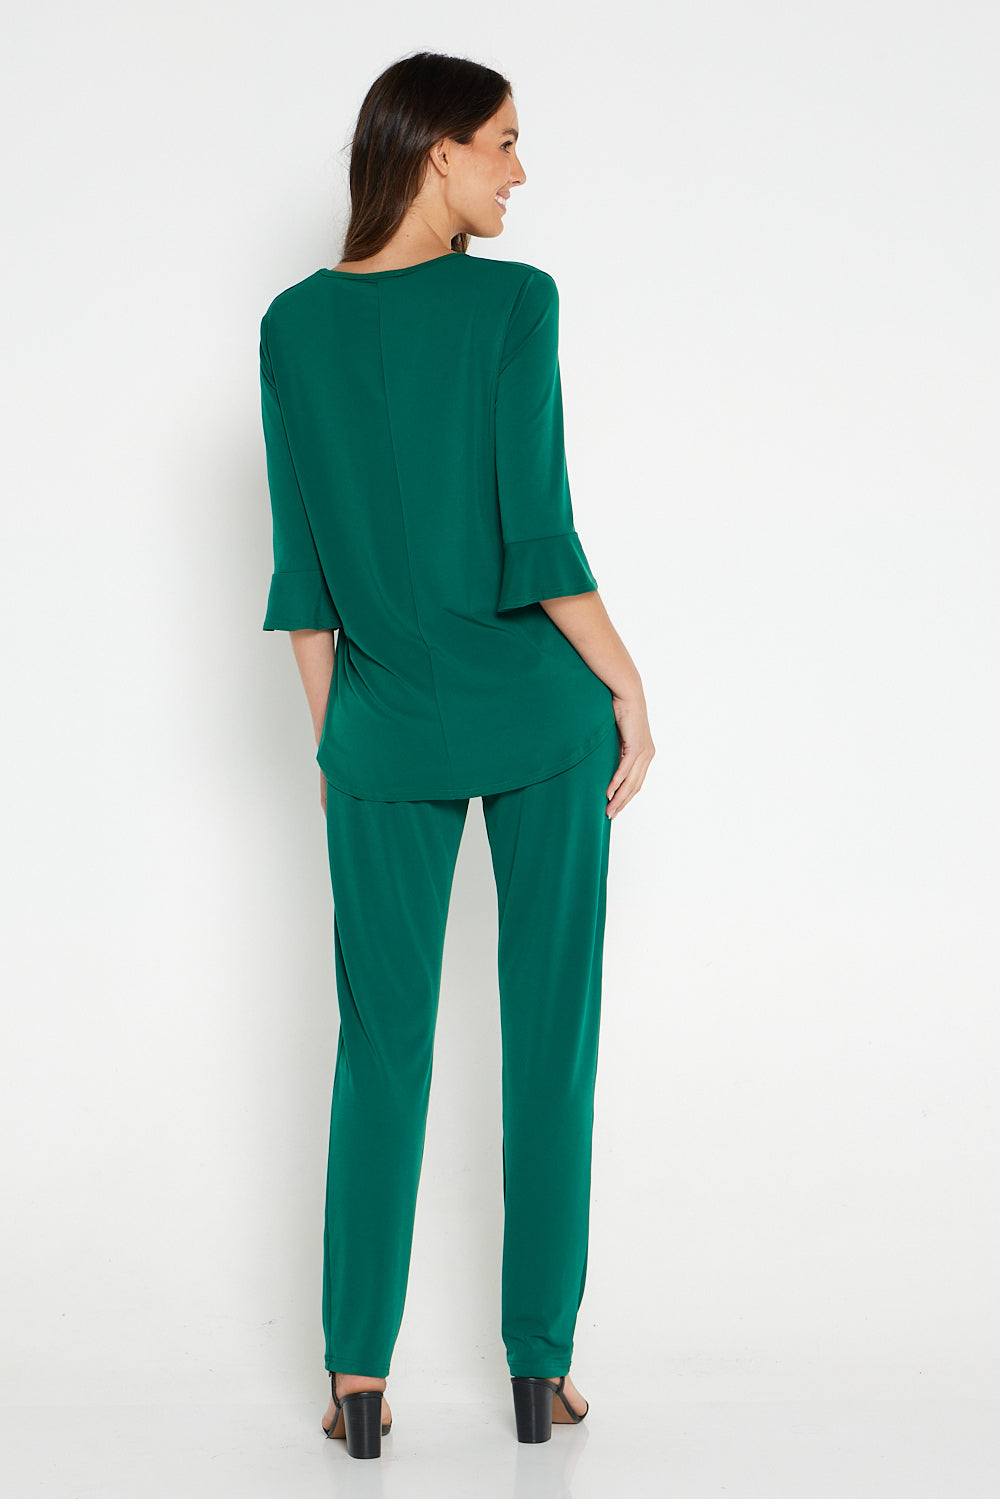 Gianna Pants Tall - Forest